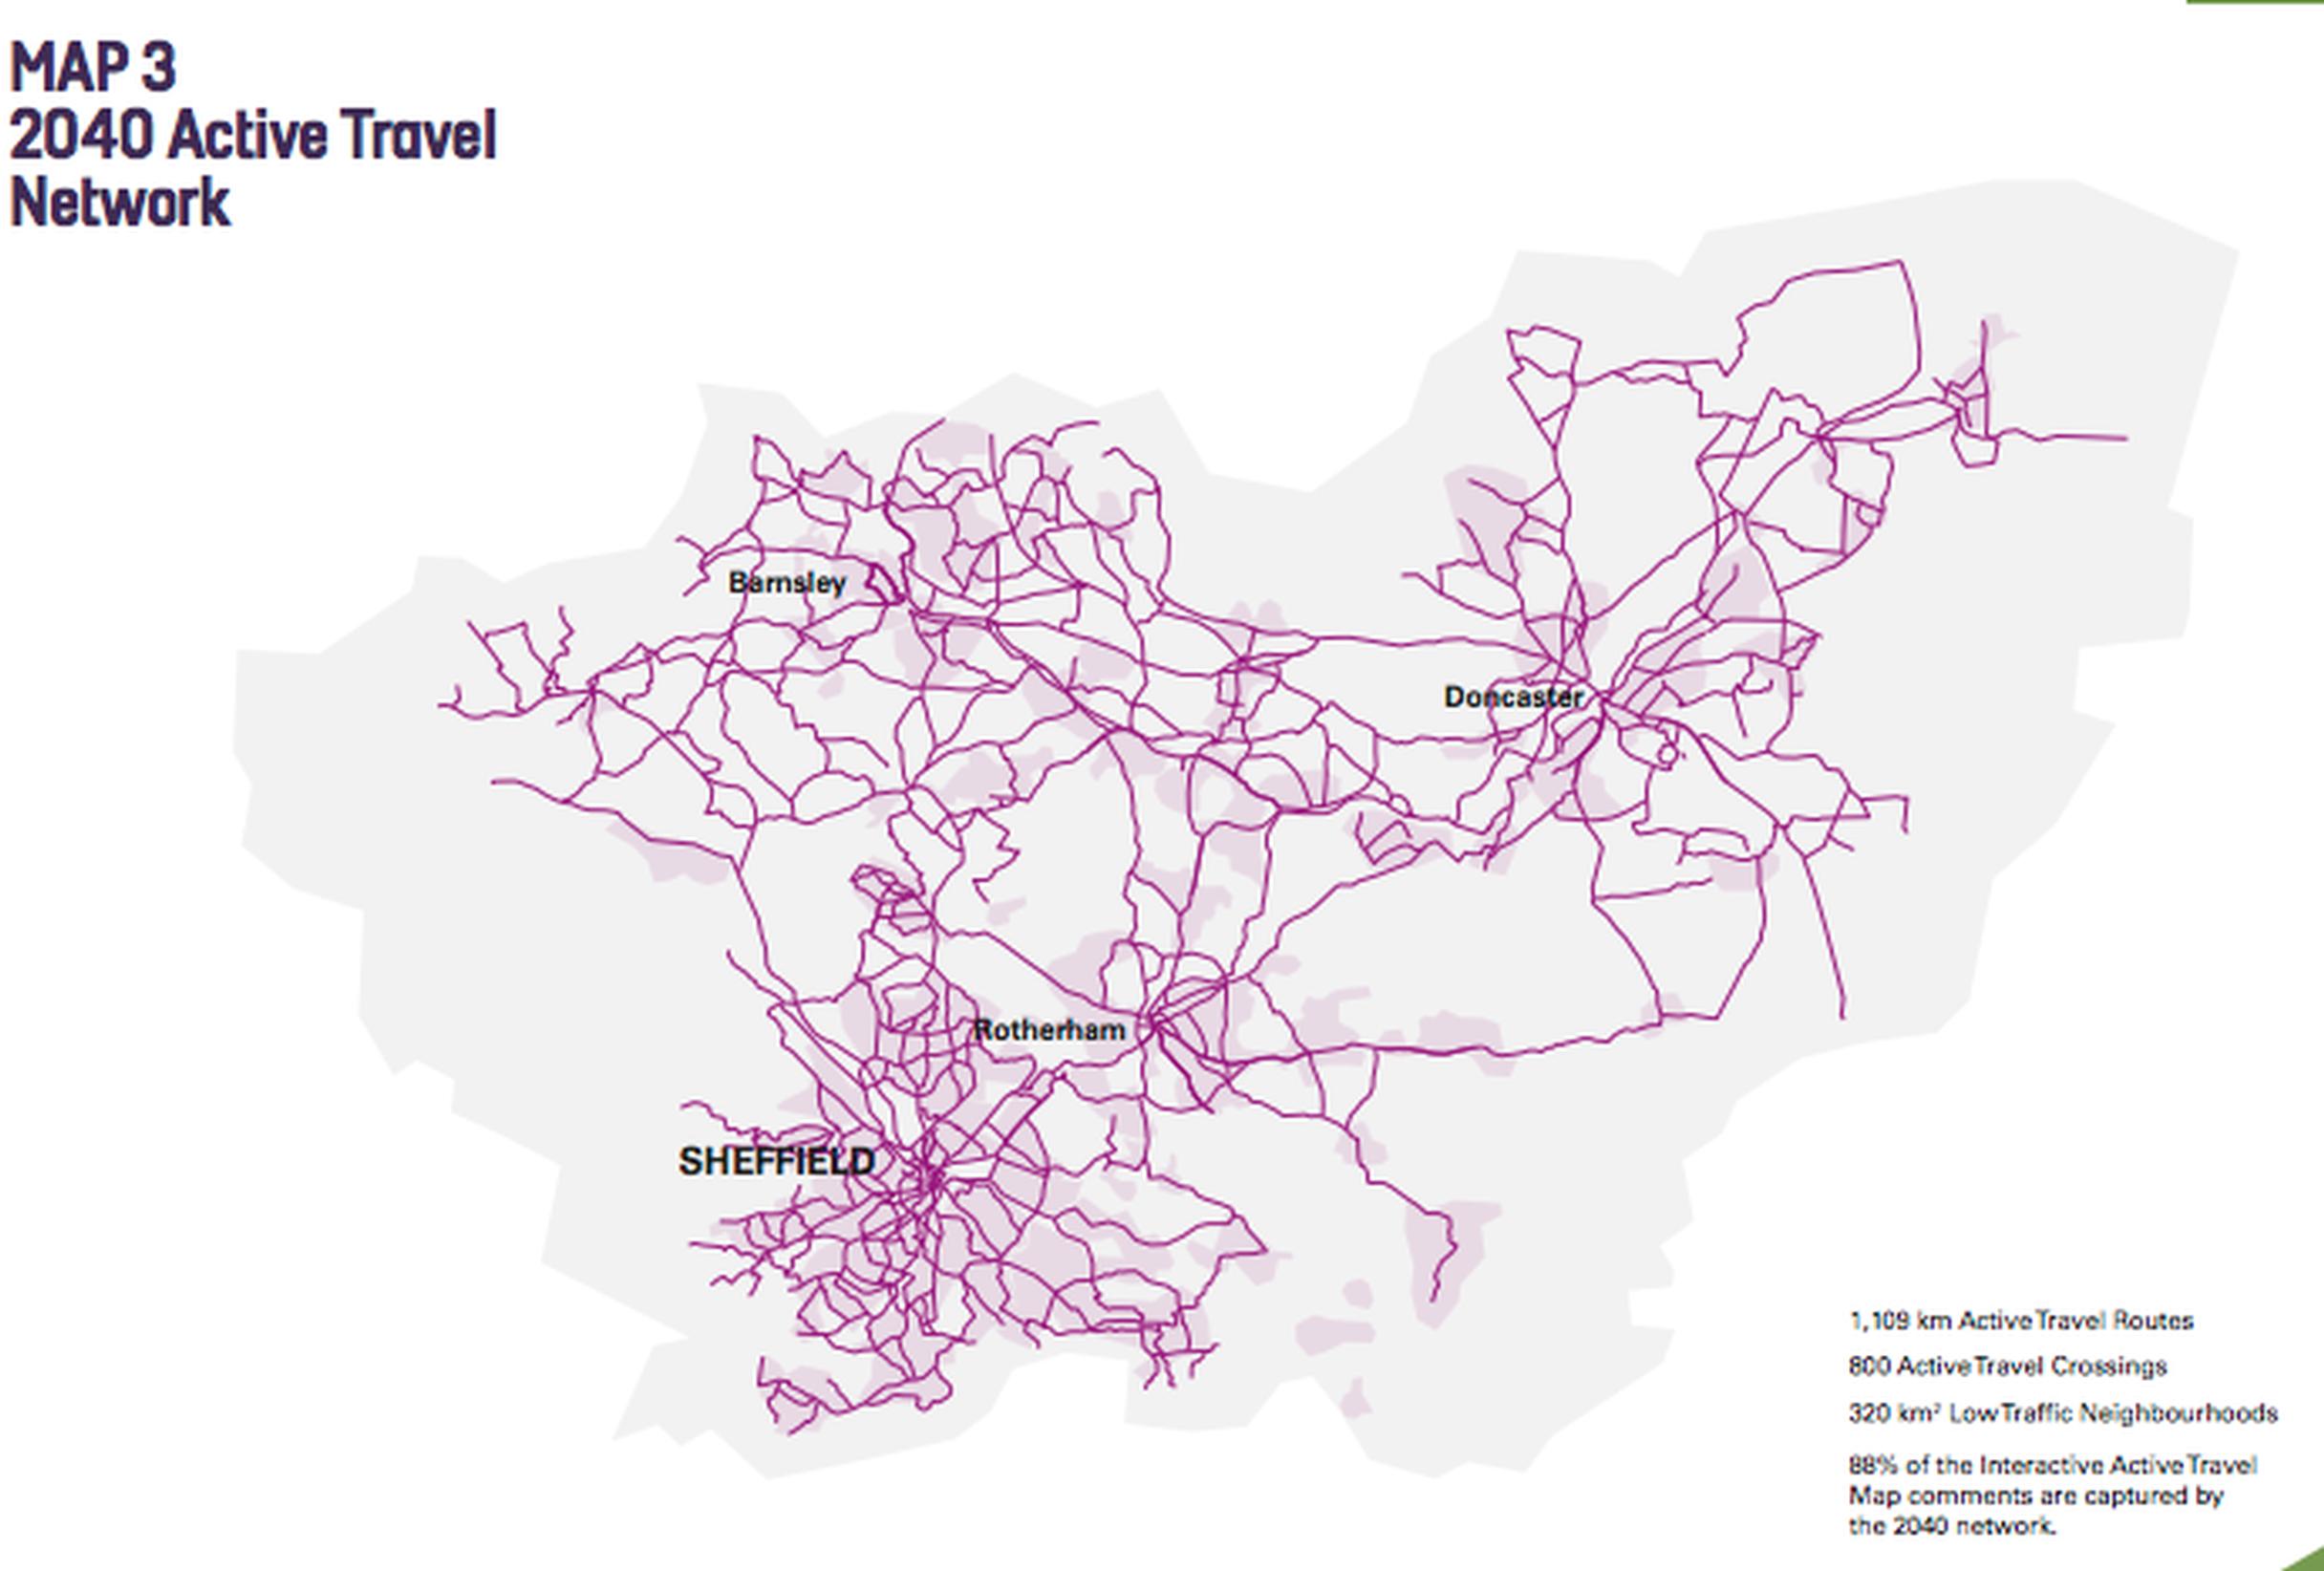 Planned 2040 Active Travel Network